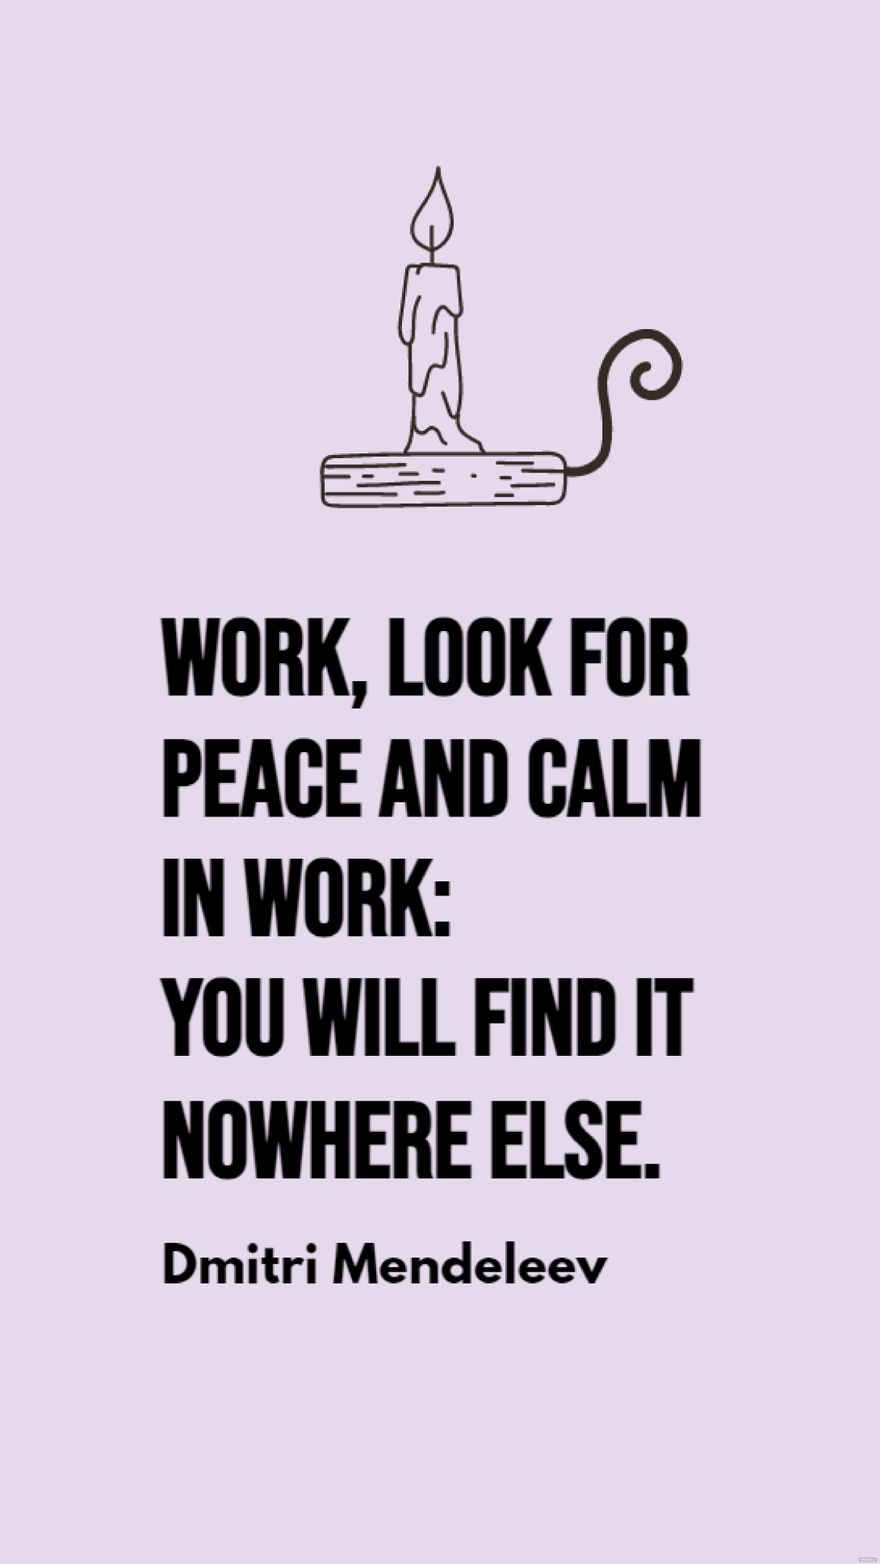 Free Dmitri Mendeleev - Work, look for peace and calm in work: you will find it nowhere else.